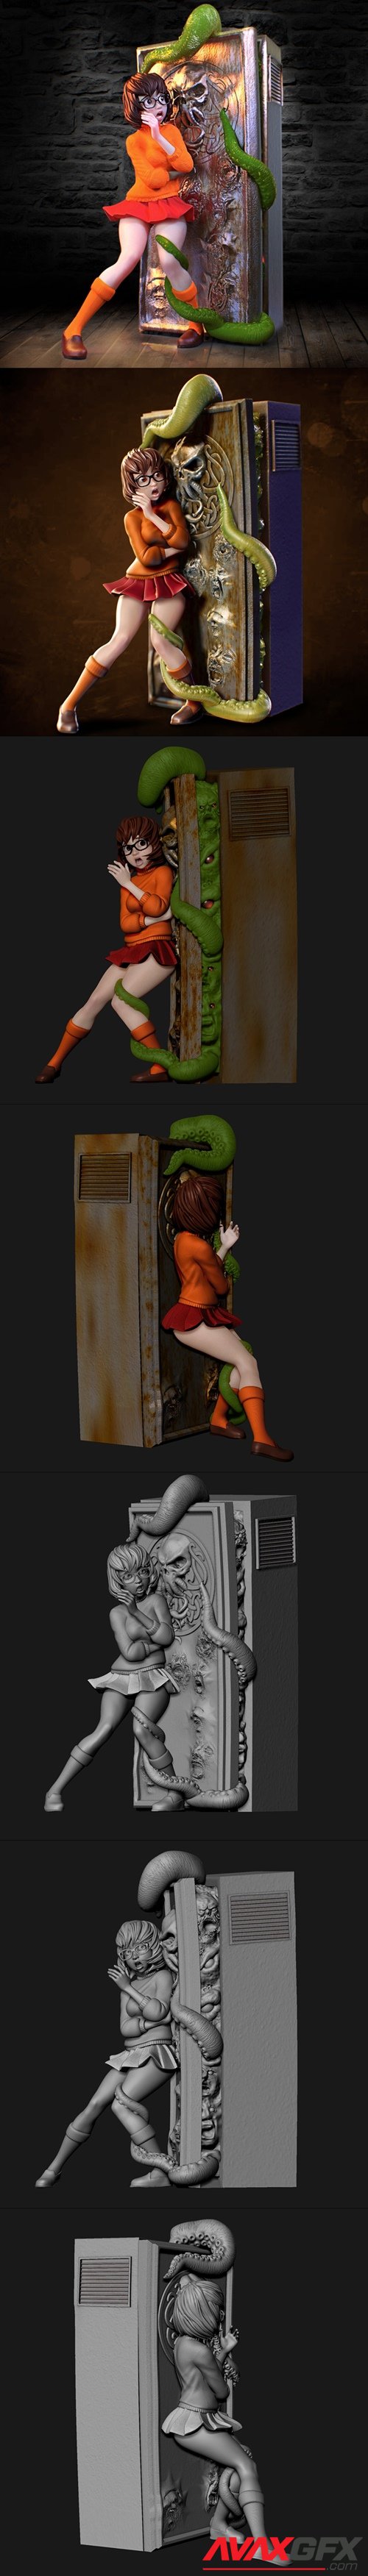 Velma In call of cthulhu – 3D Printable STL